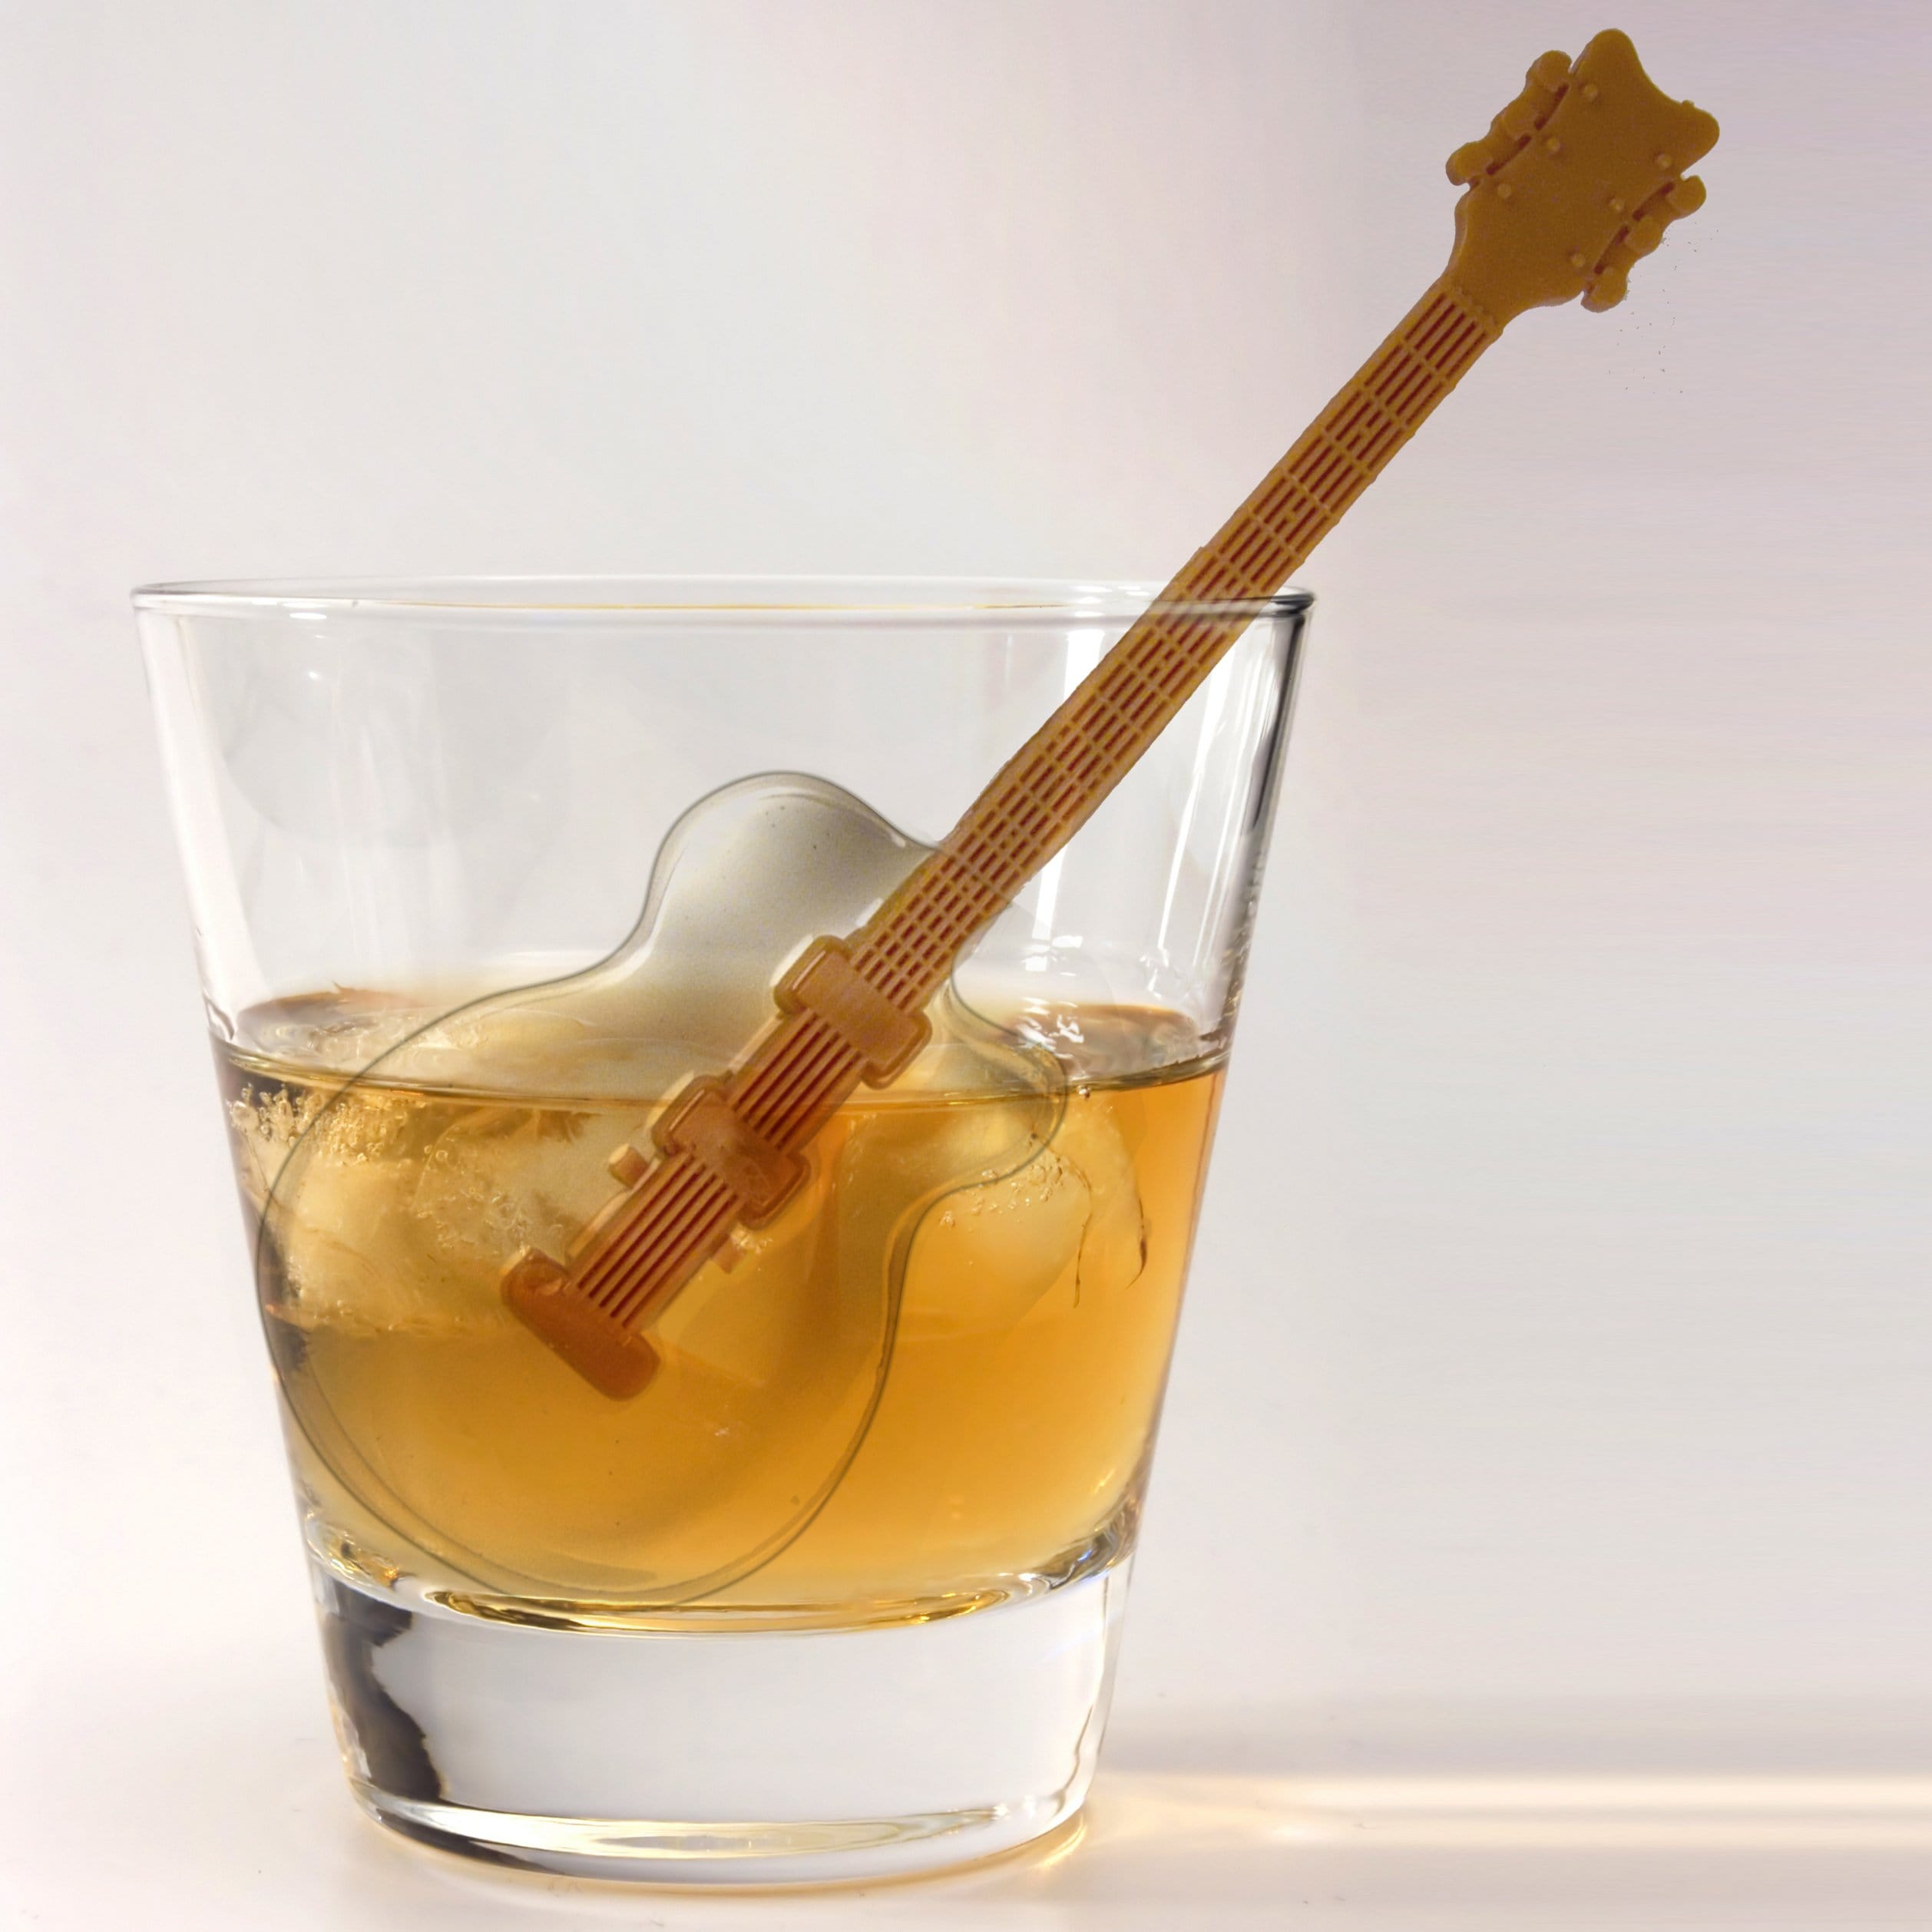 Genuine Fred COOL JAZZ Guitar Ice Tray and Stirrers 